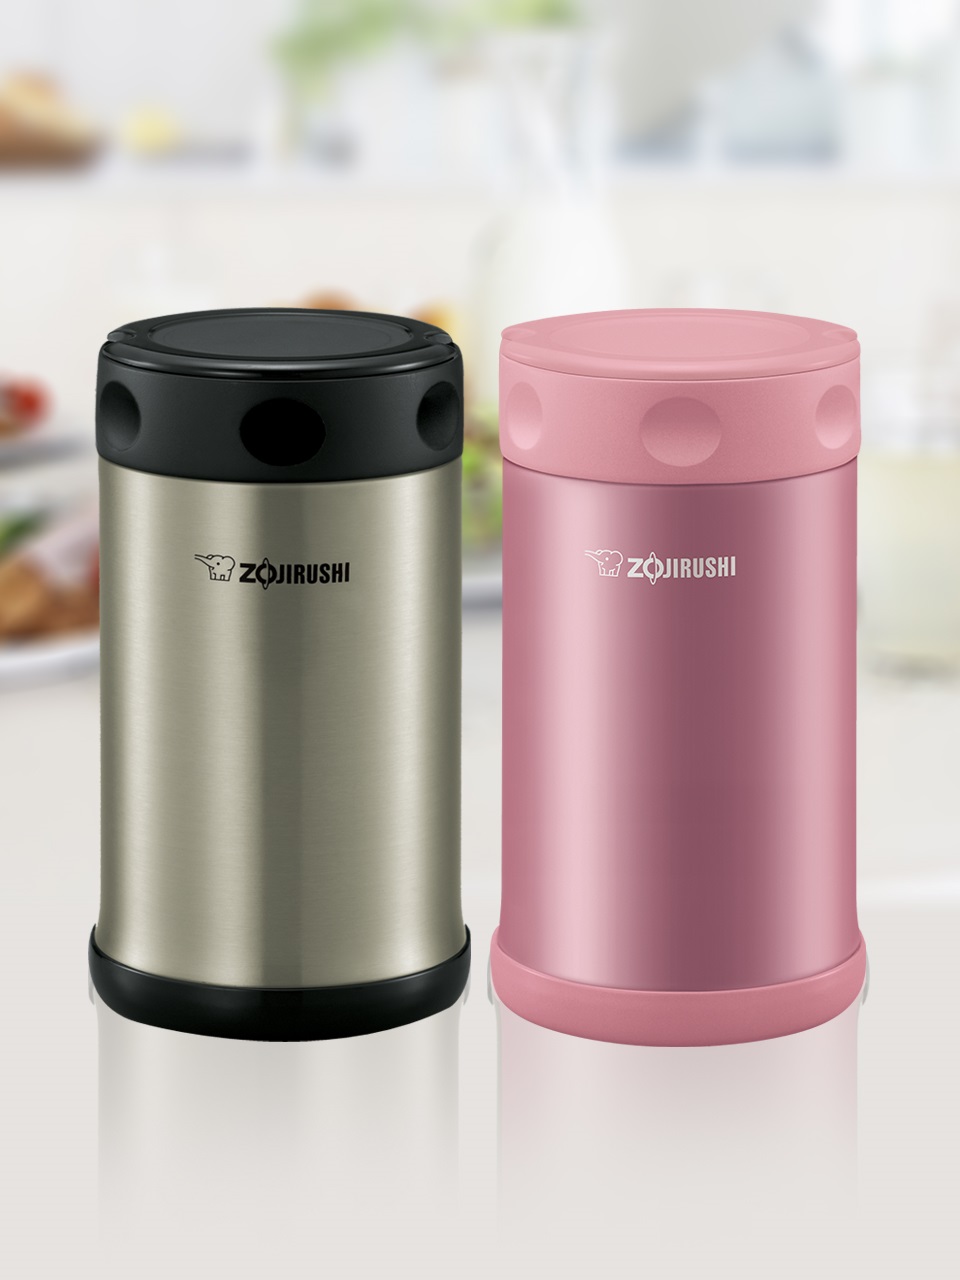 Zojirushi Lunch Jar - Convenient Microwaveable Containers We Can Depend On  - Mommy Bloggers Philippines - Mommy Bloggers Philippines